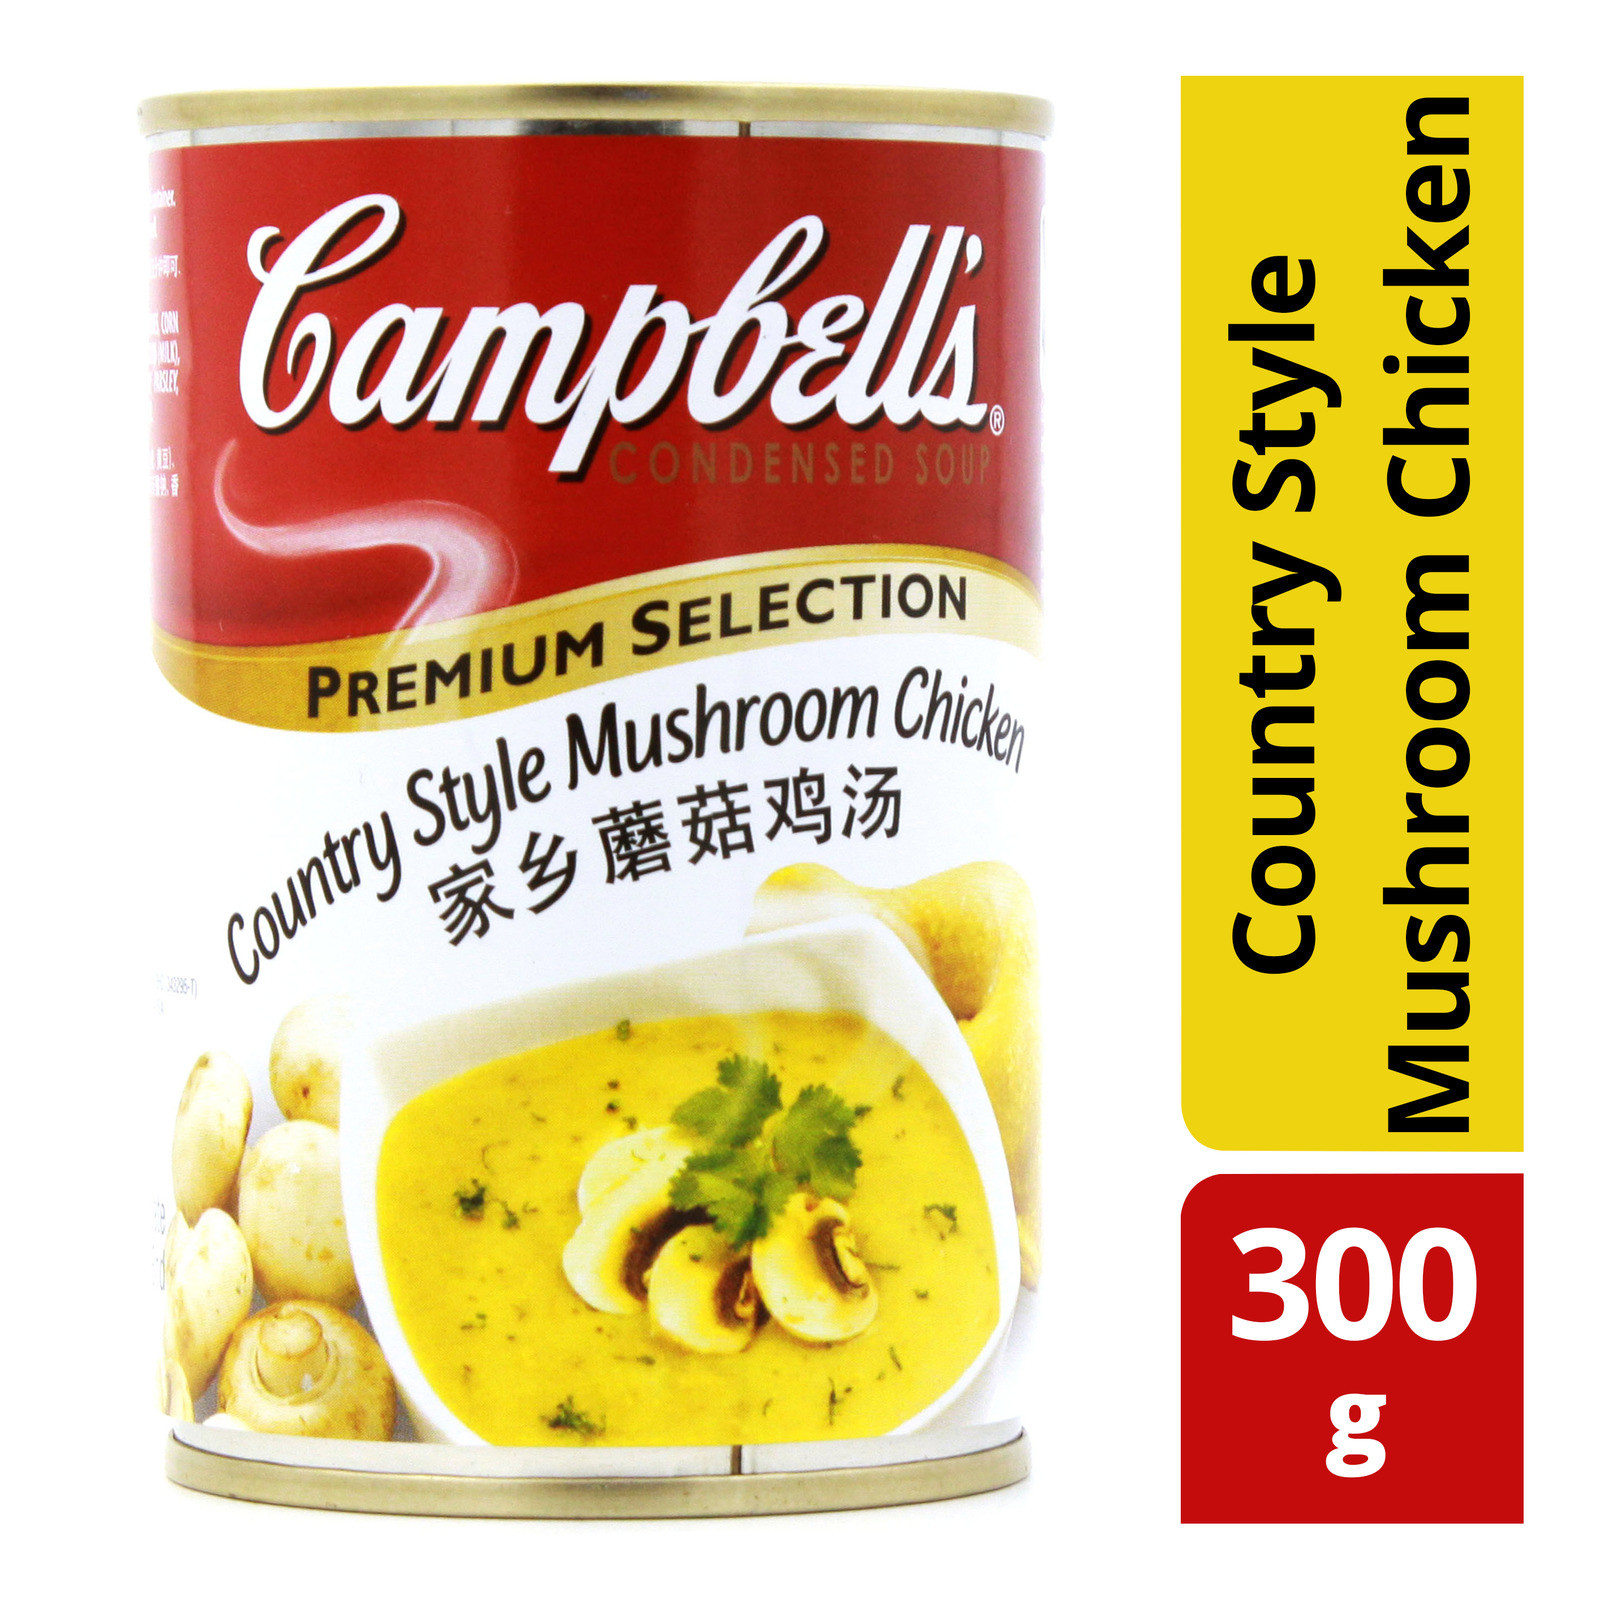 Campbell Mushroom Soup Chicken
 Campbell s Condensed Soup Country Style Mushroom Chicken